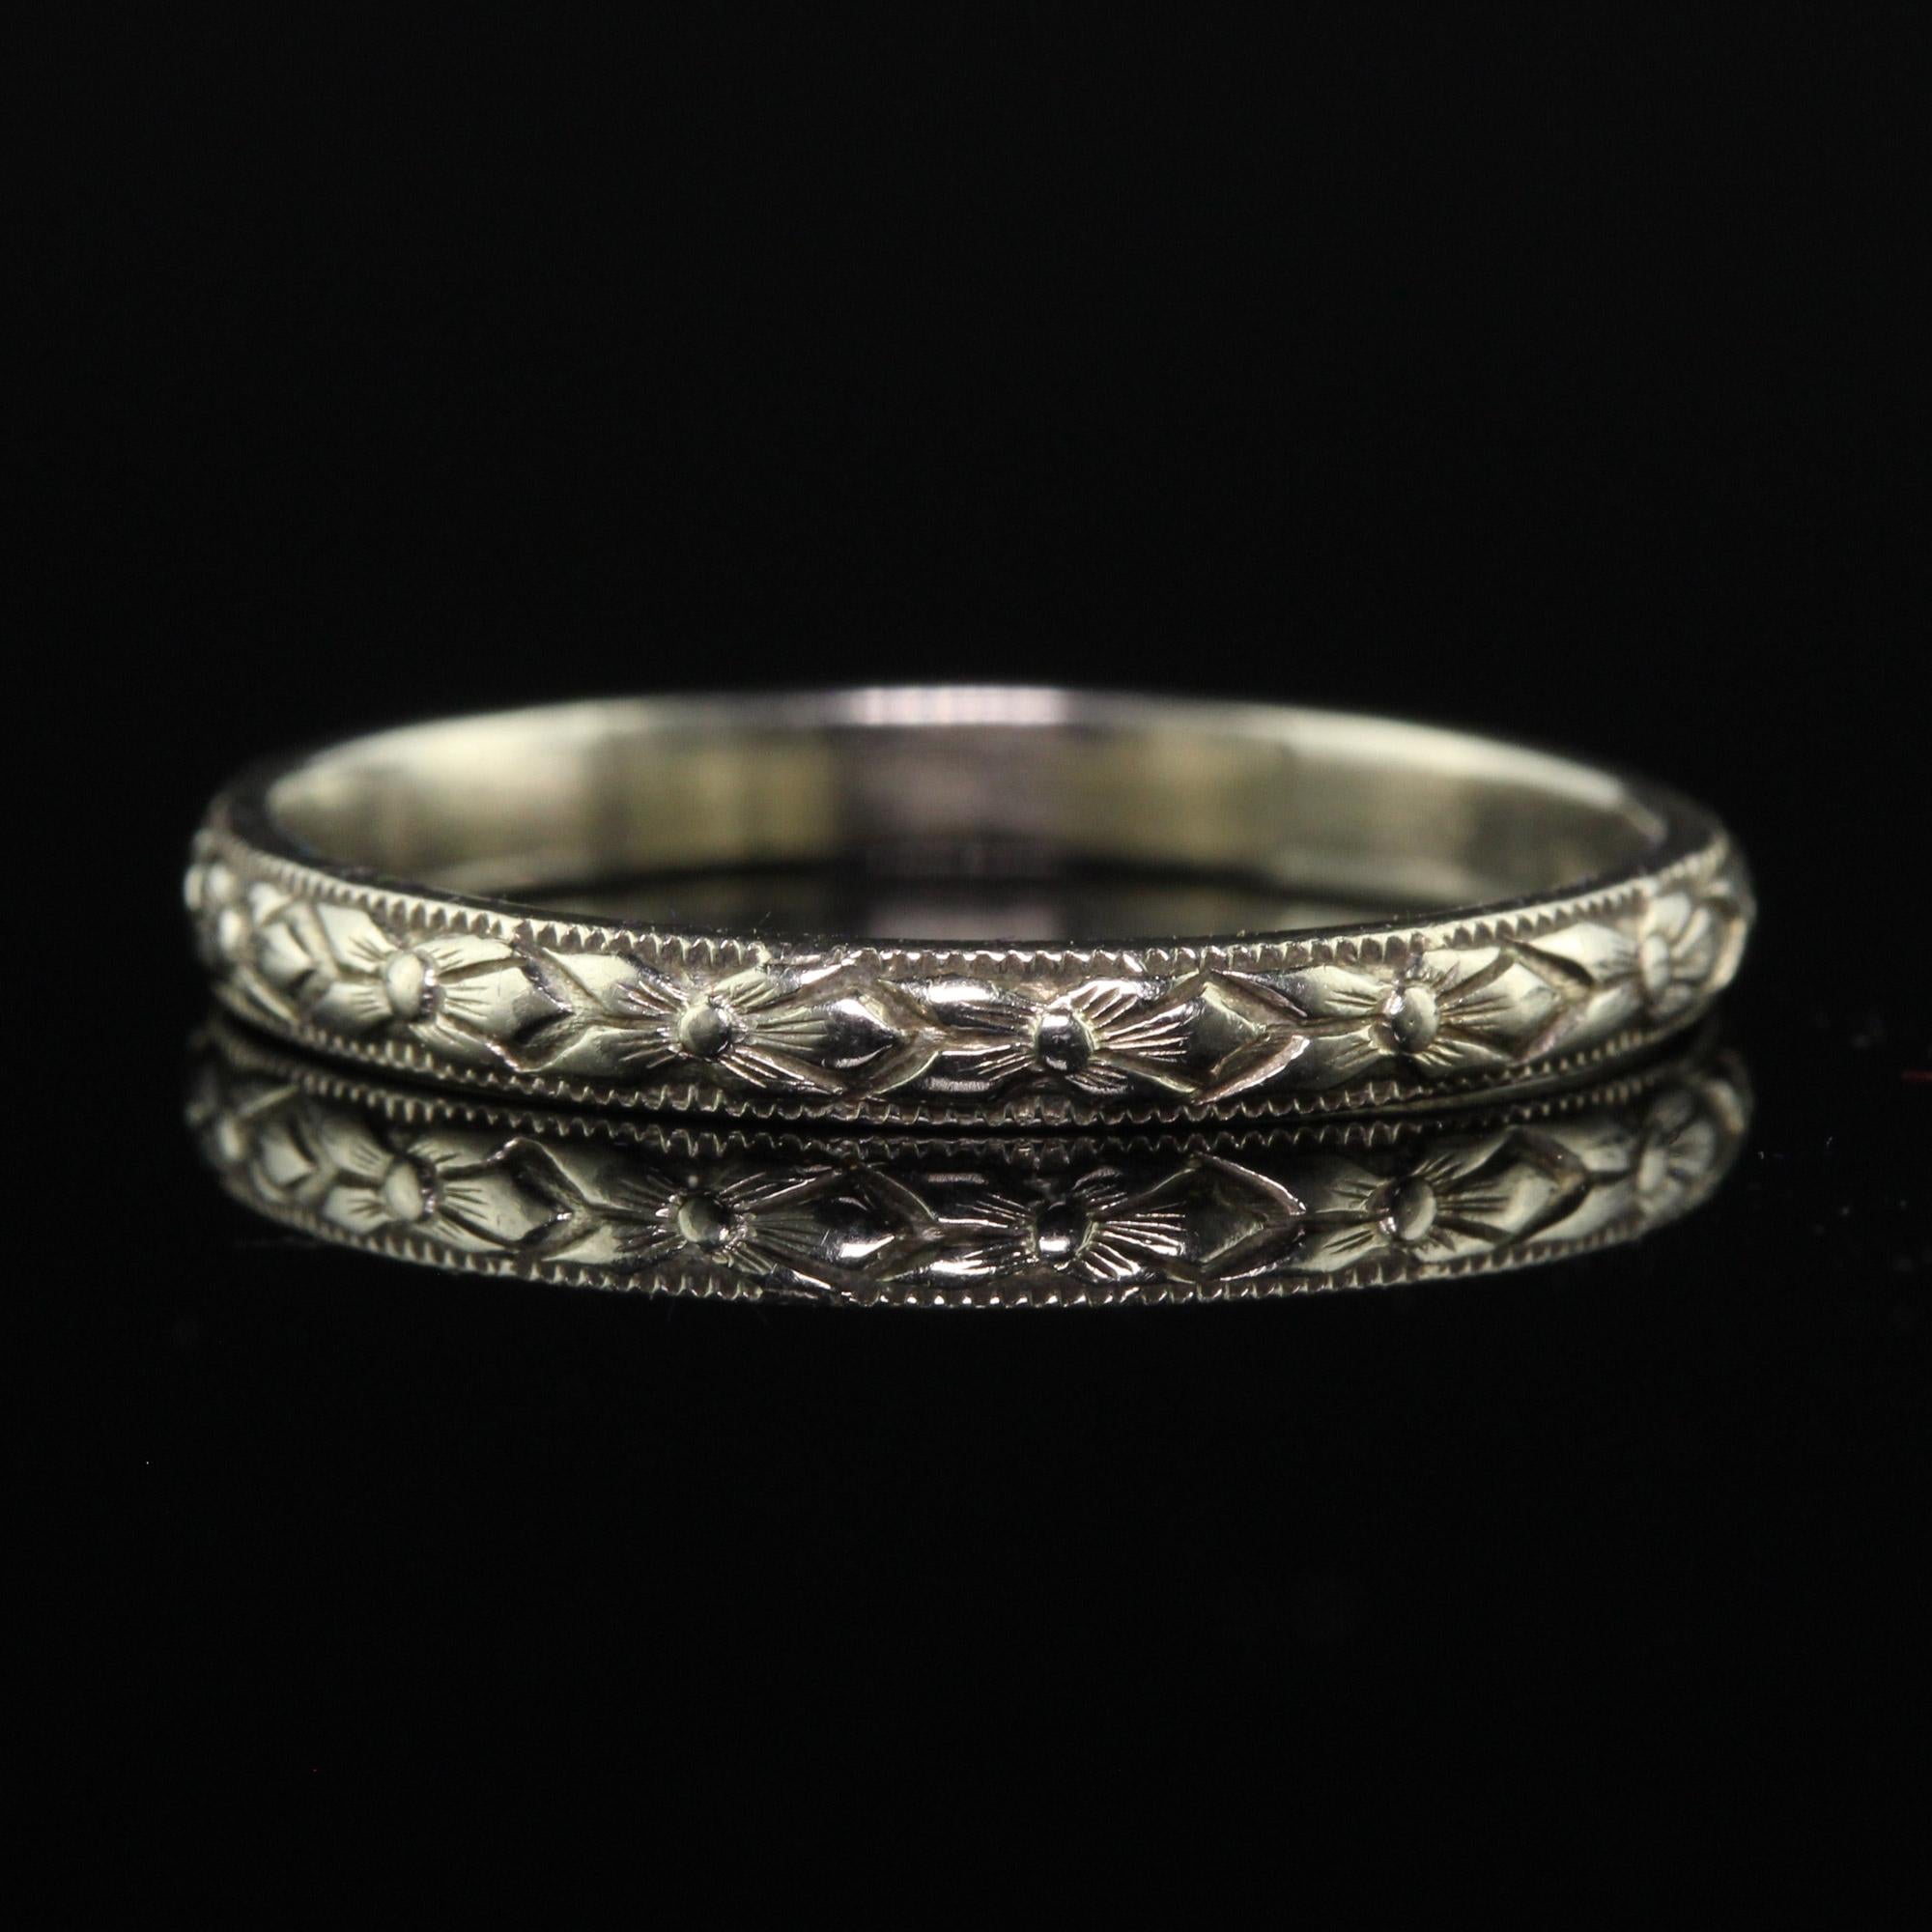 Women's Antique Art Deco 18K White Gold Engraved Wedding Band - Size 5 1/2 For Sale